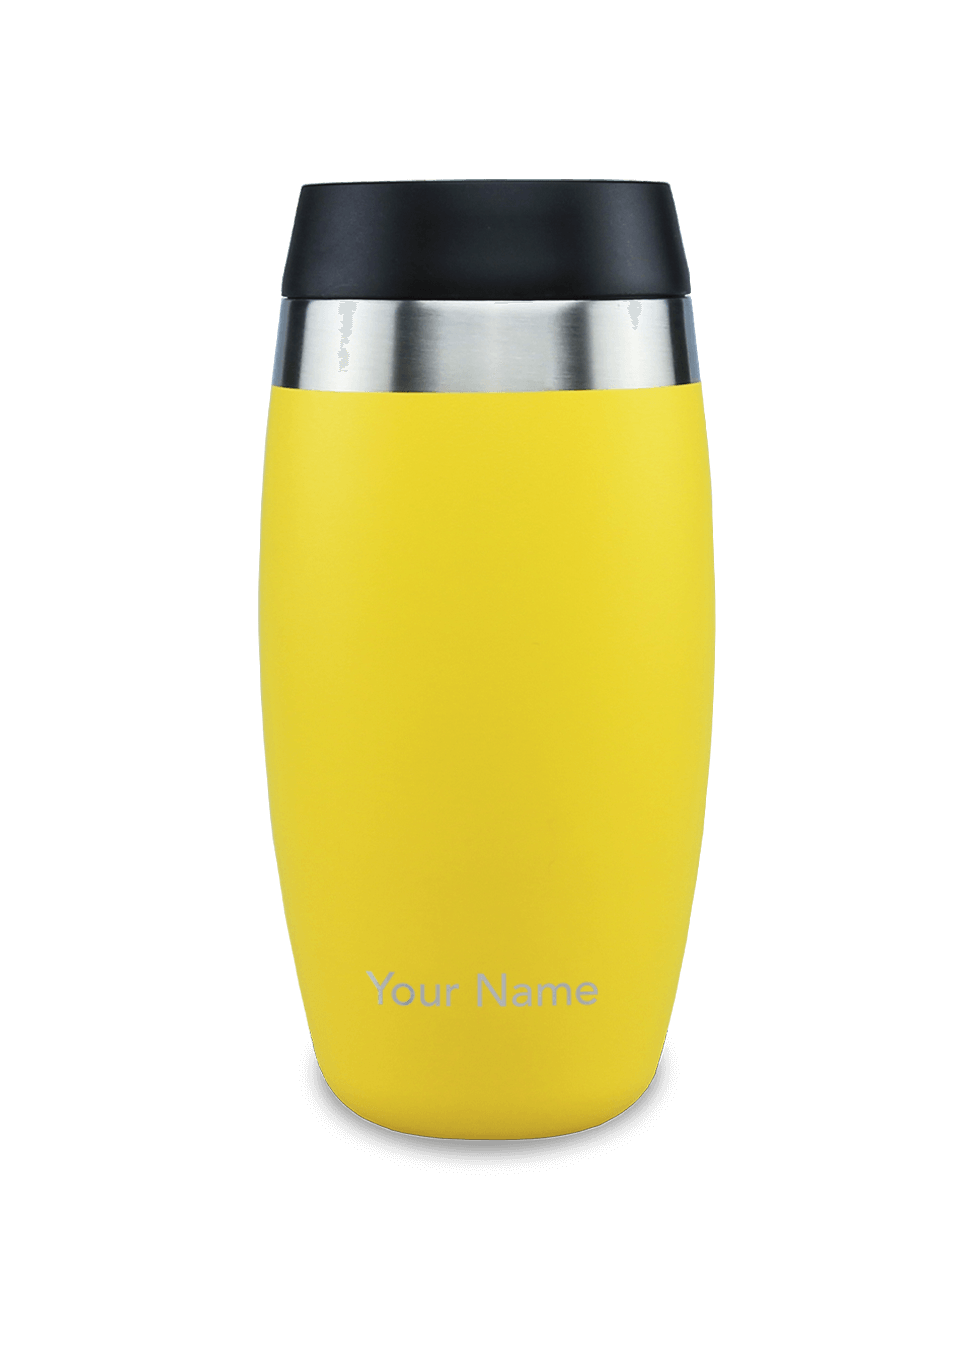 Personalised insulated reusable coffee cup in yellow